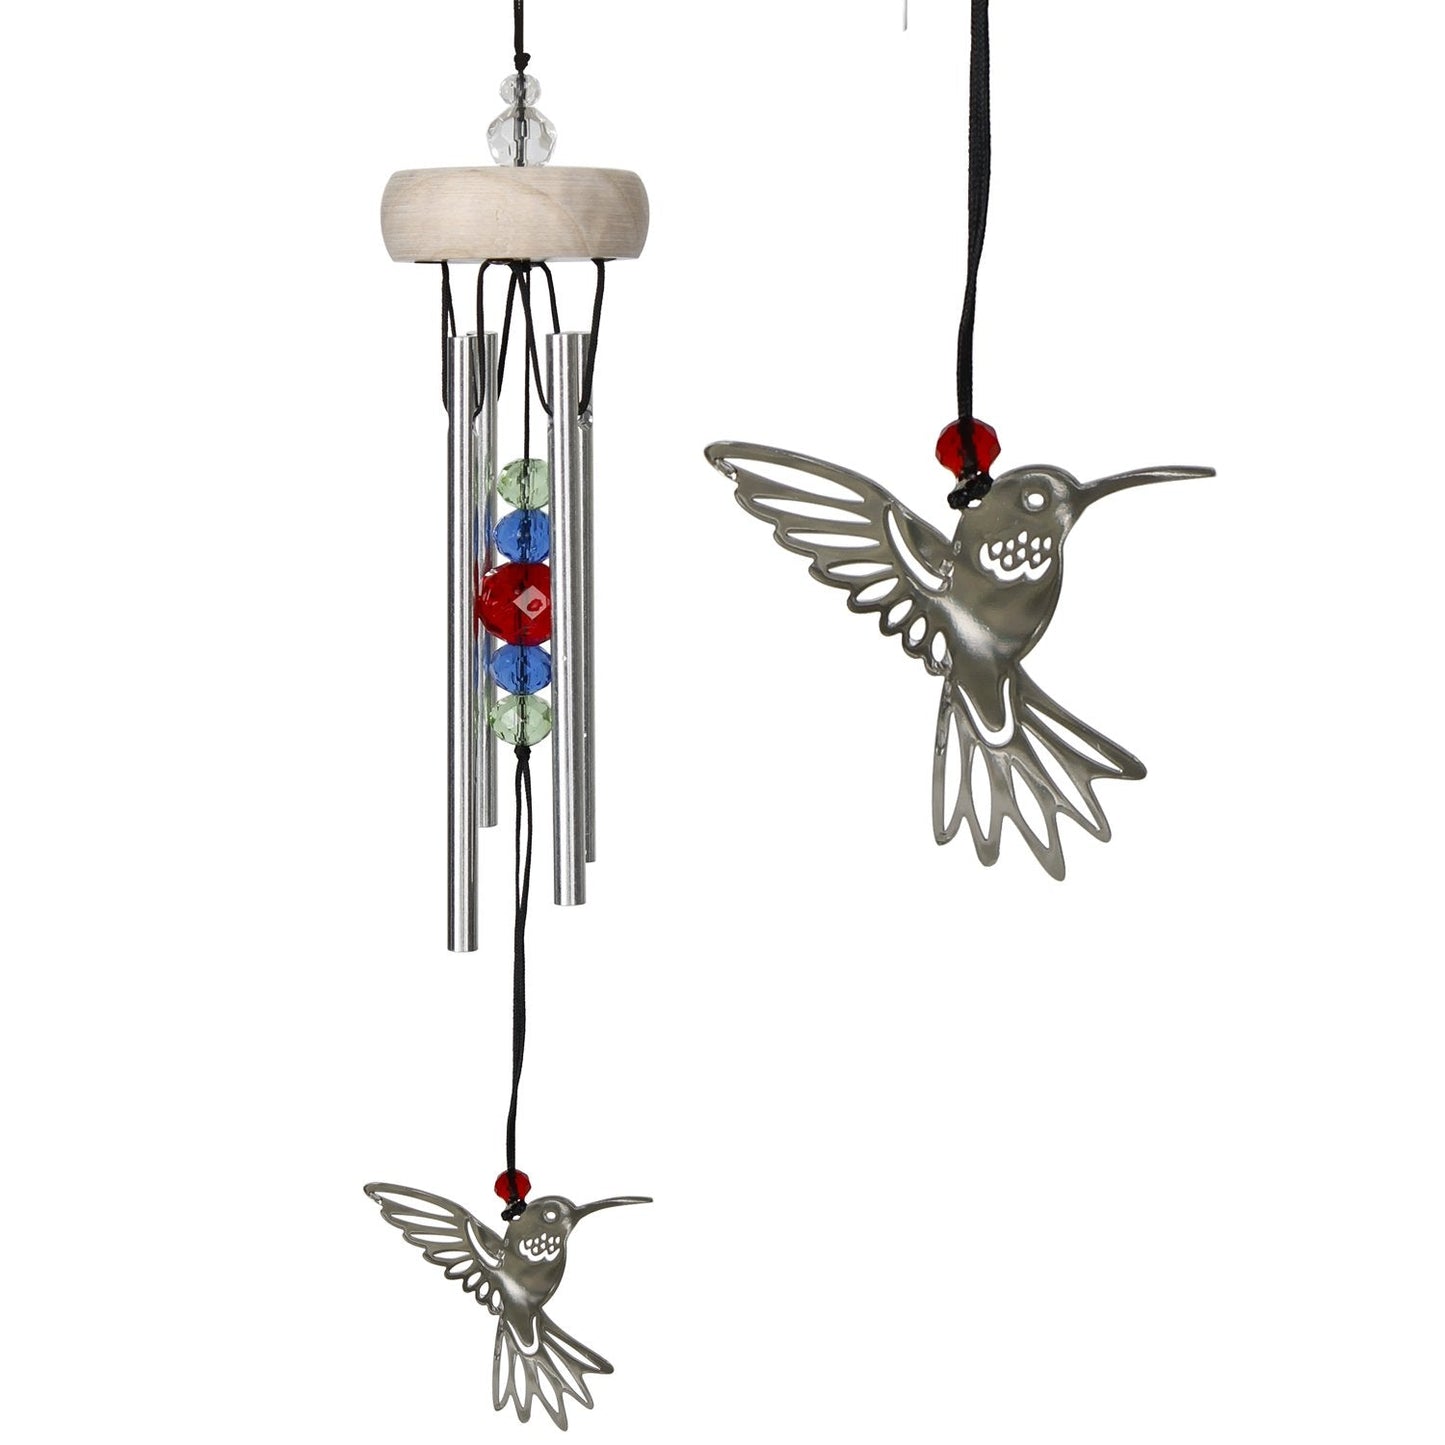 Chime Fantasy™ Wind Chime - Hummingbird - by Woodstock Chimes